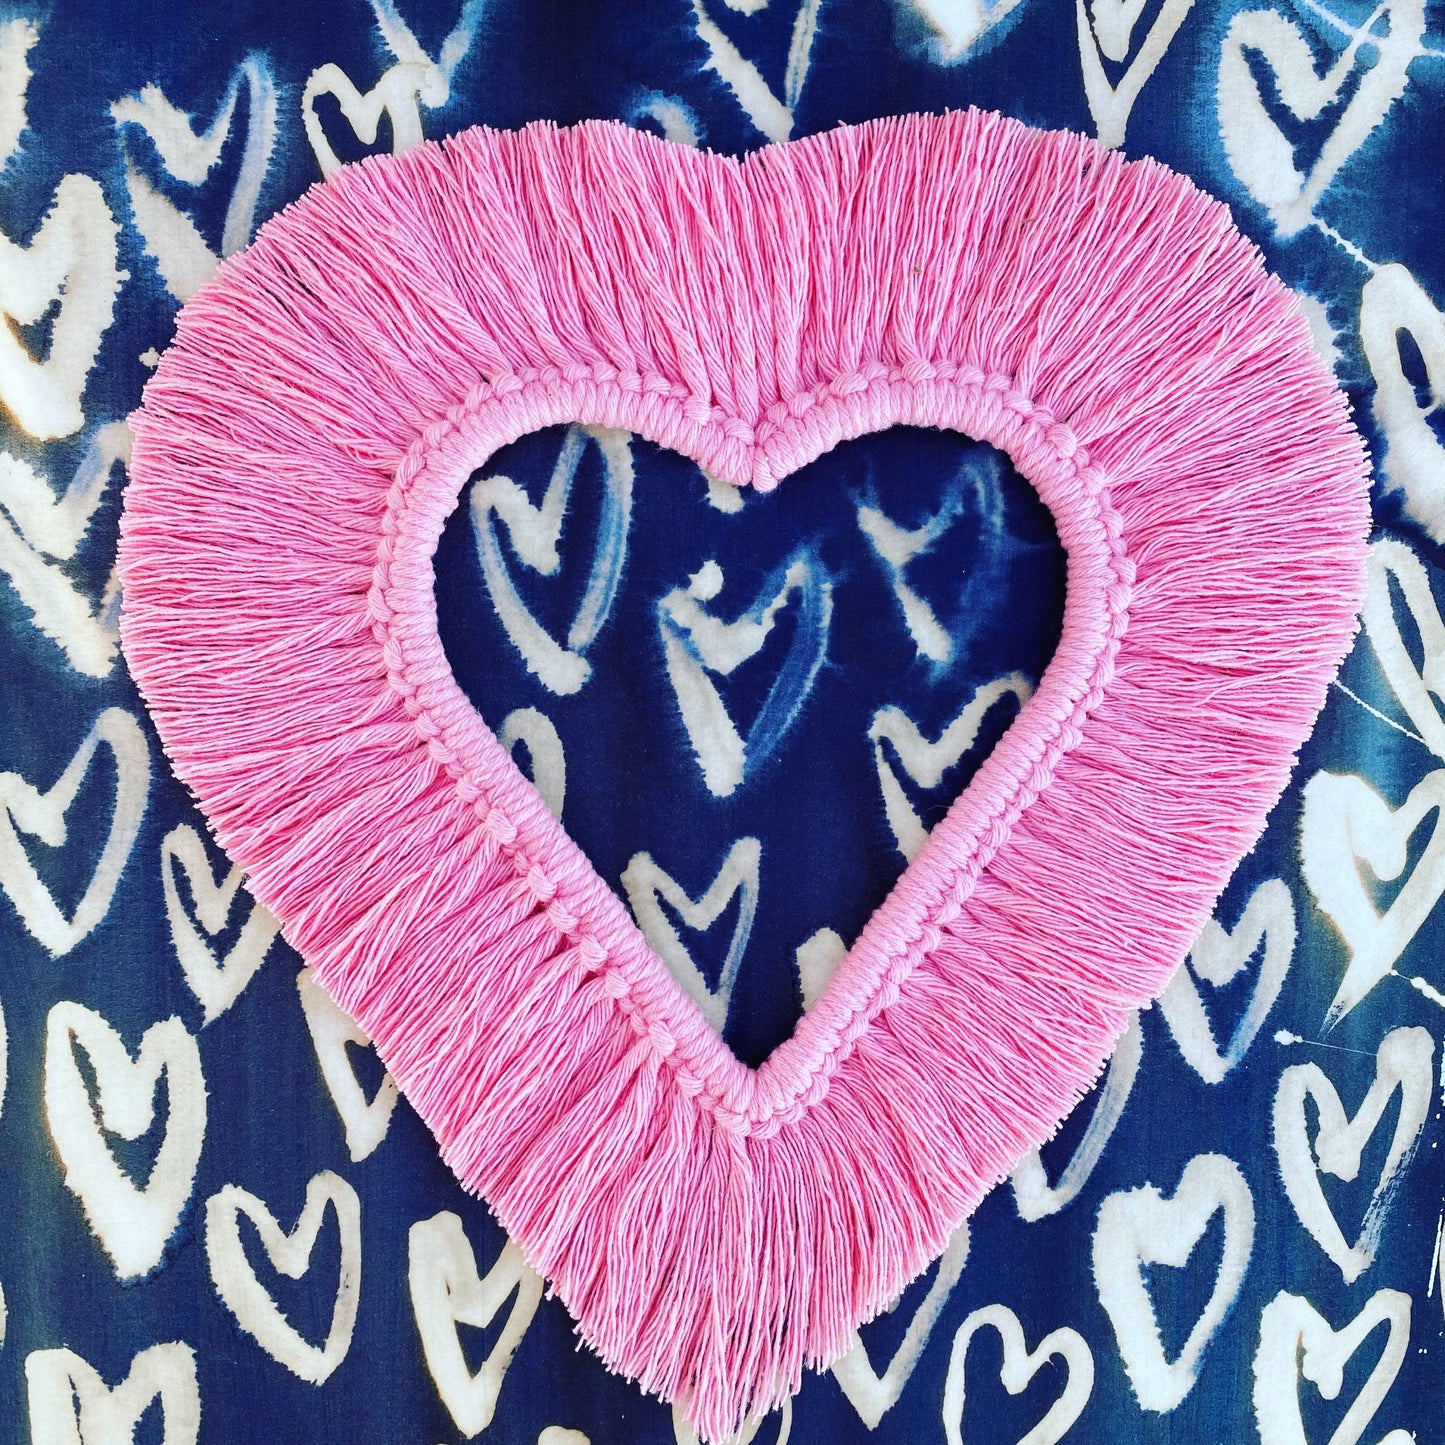 In the pink macrame heart